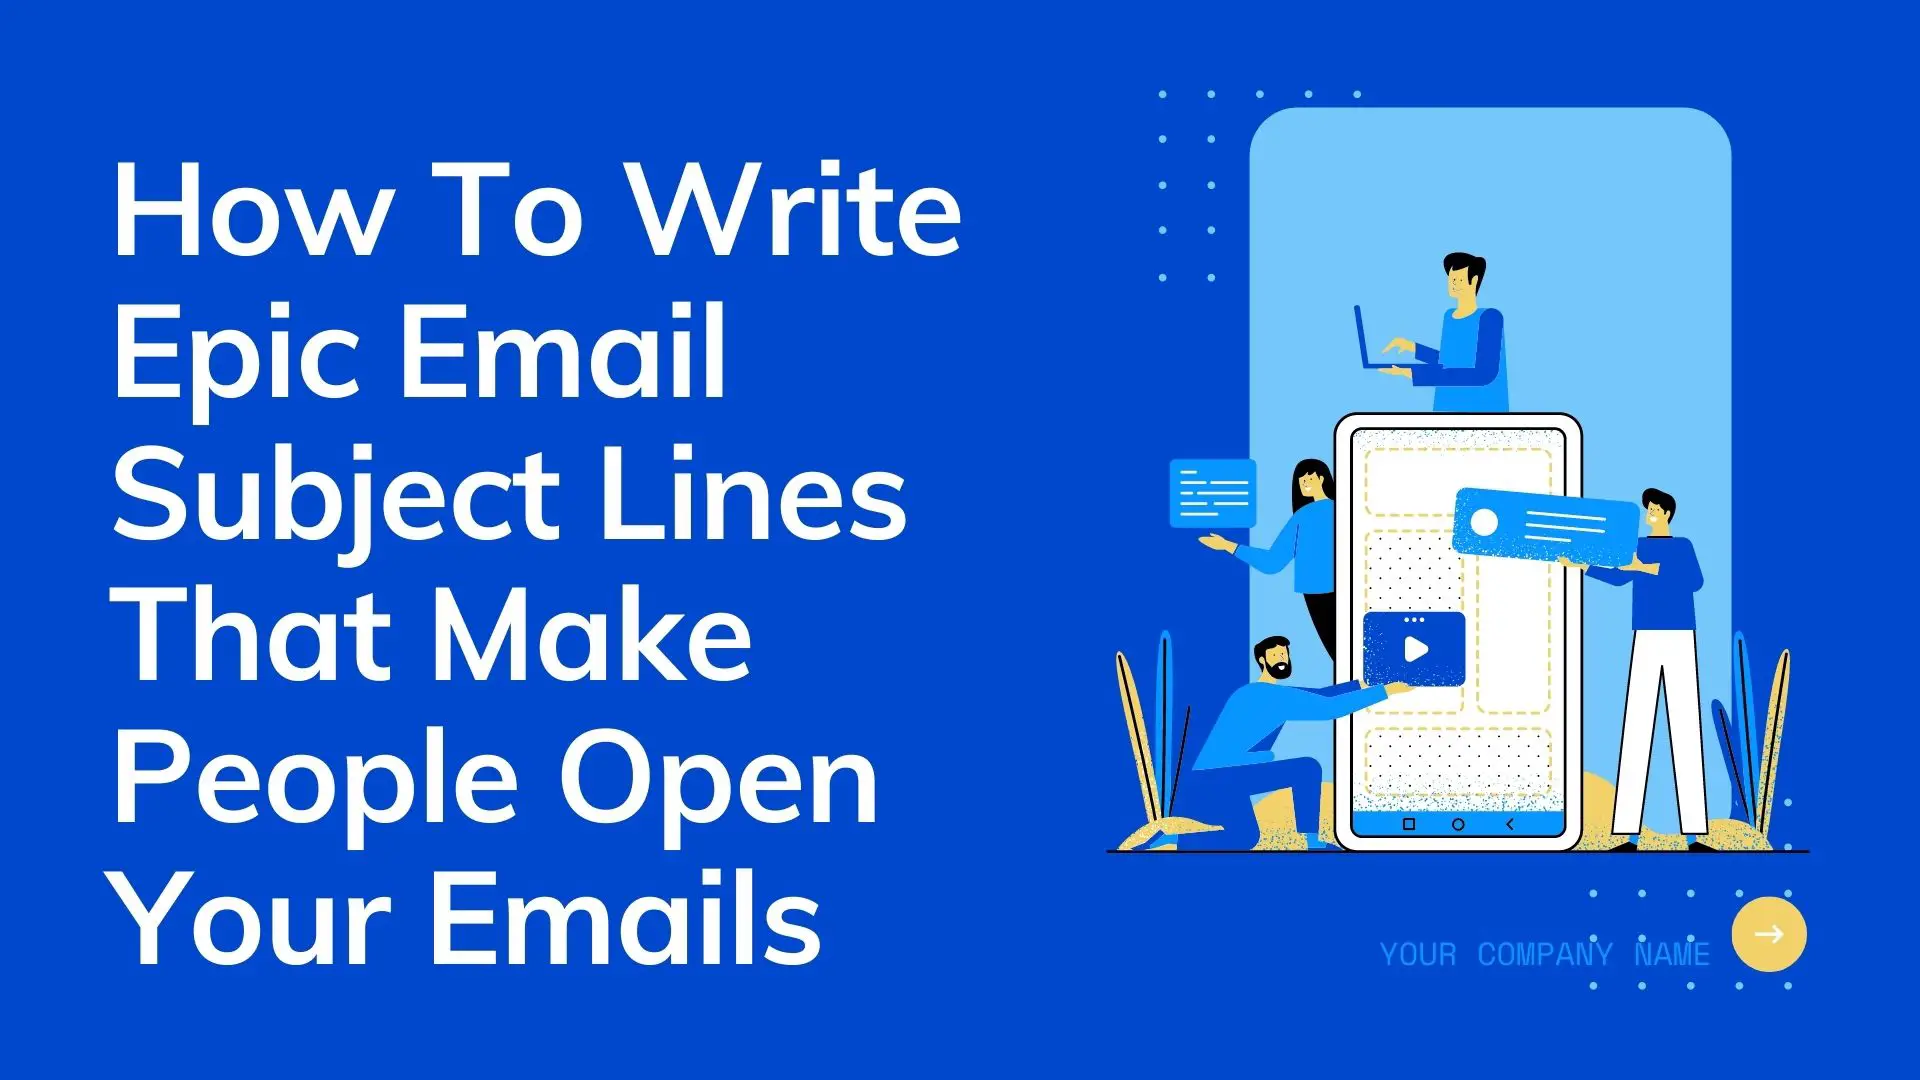 How To Write Epic Email Subject Lines That Make People Open Your Emails